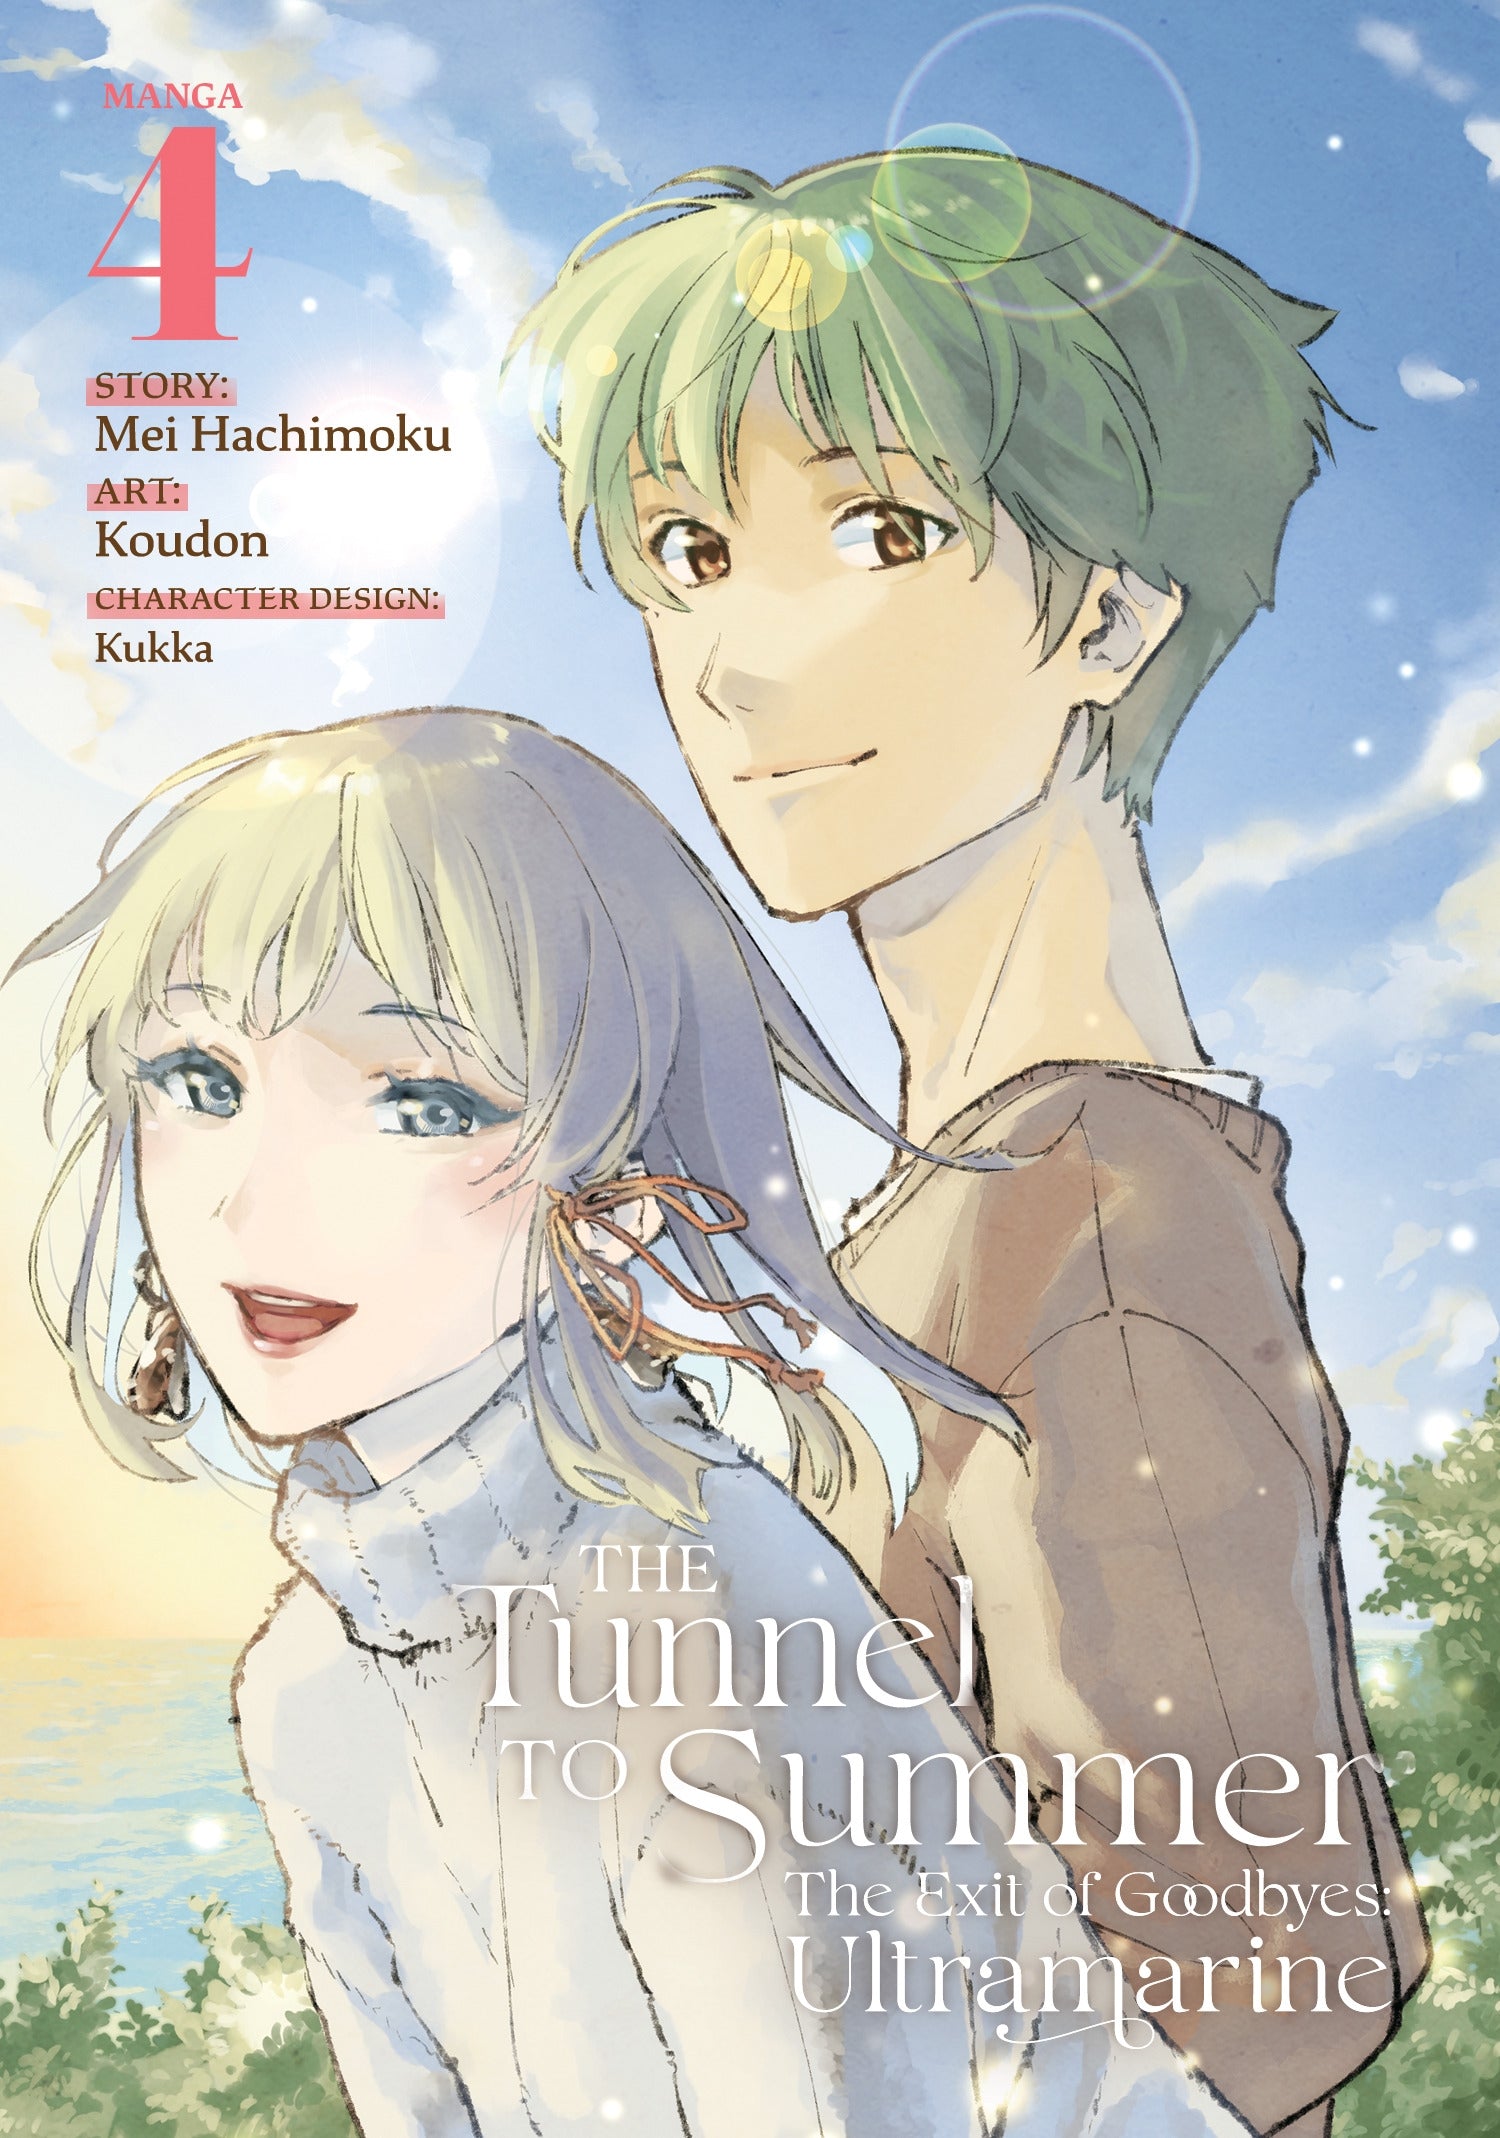 The Tunnel to Summer, the Exit of Goodbyes Ultramarine (Manga) Vol. 4